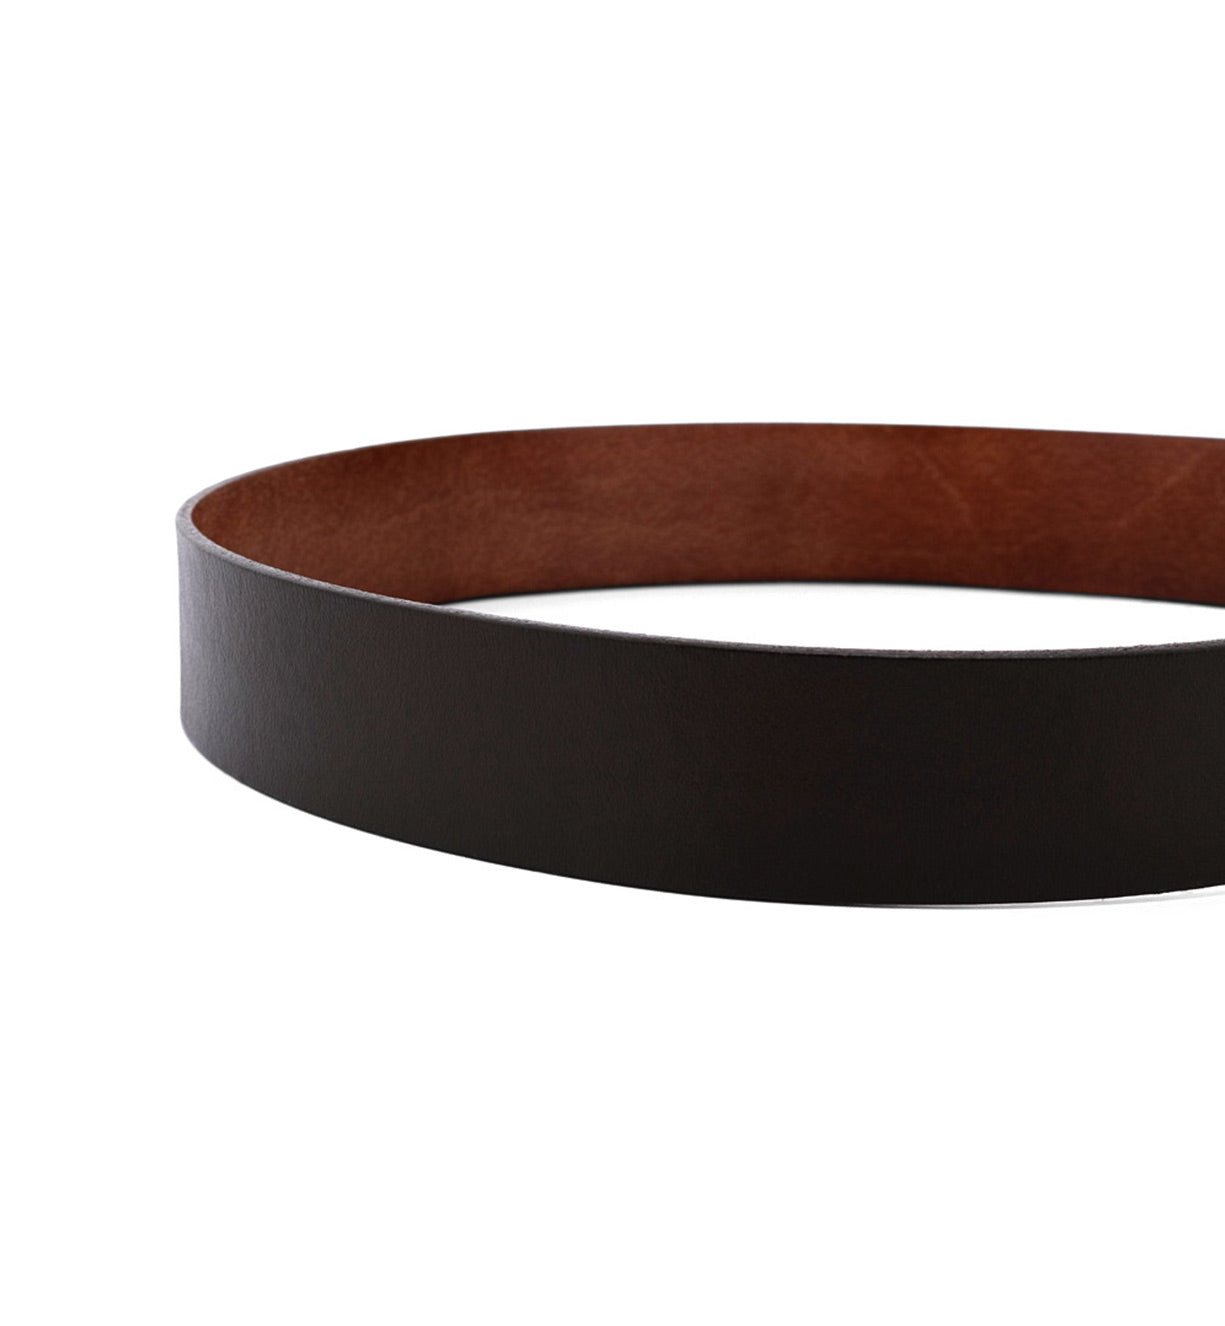 A Hobo by Bed Stu black and brown leather belt on a white background.